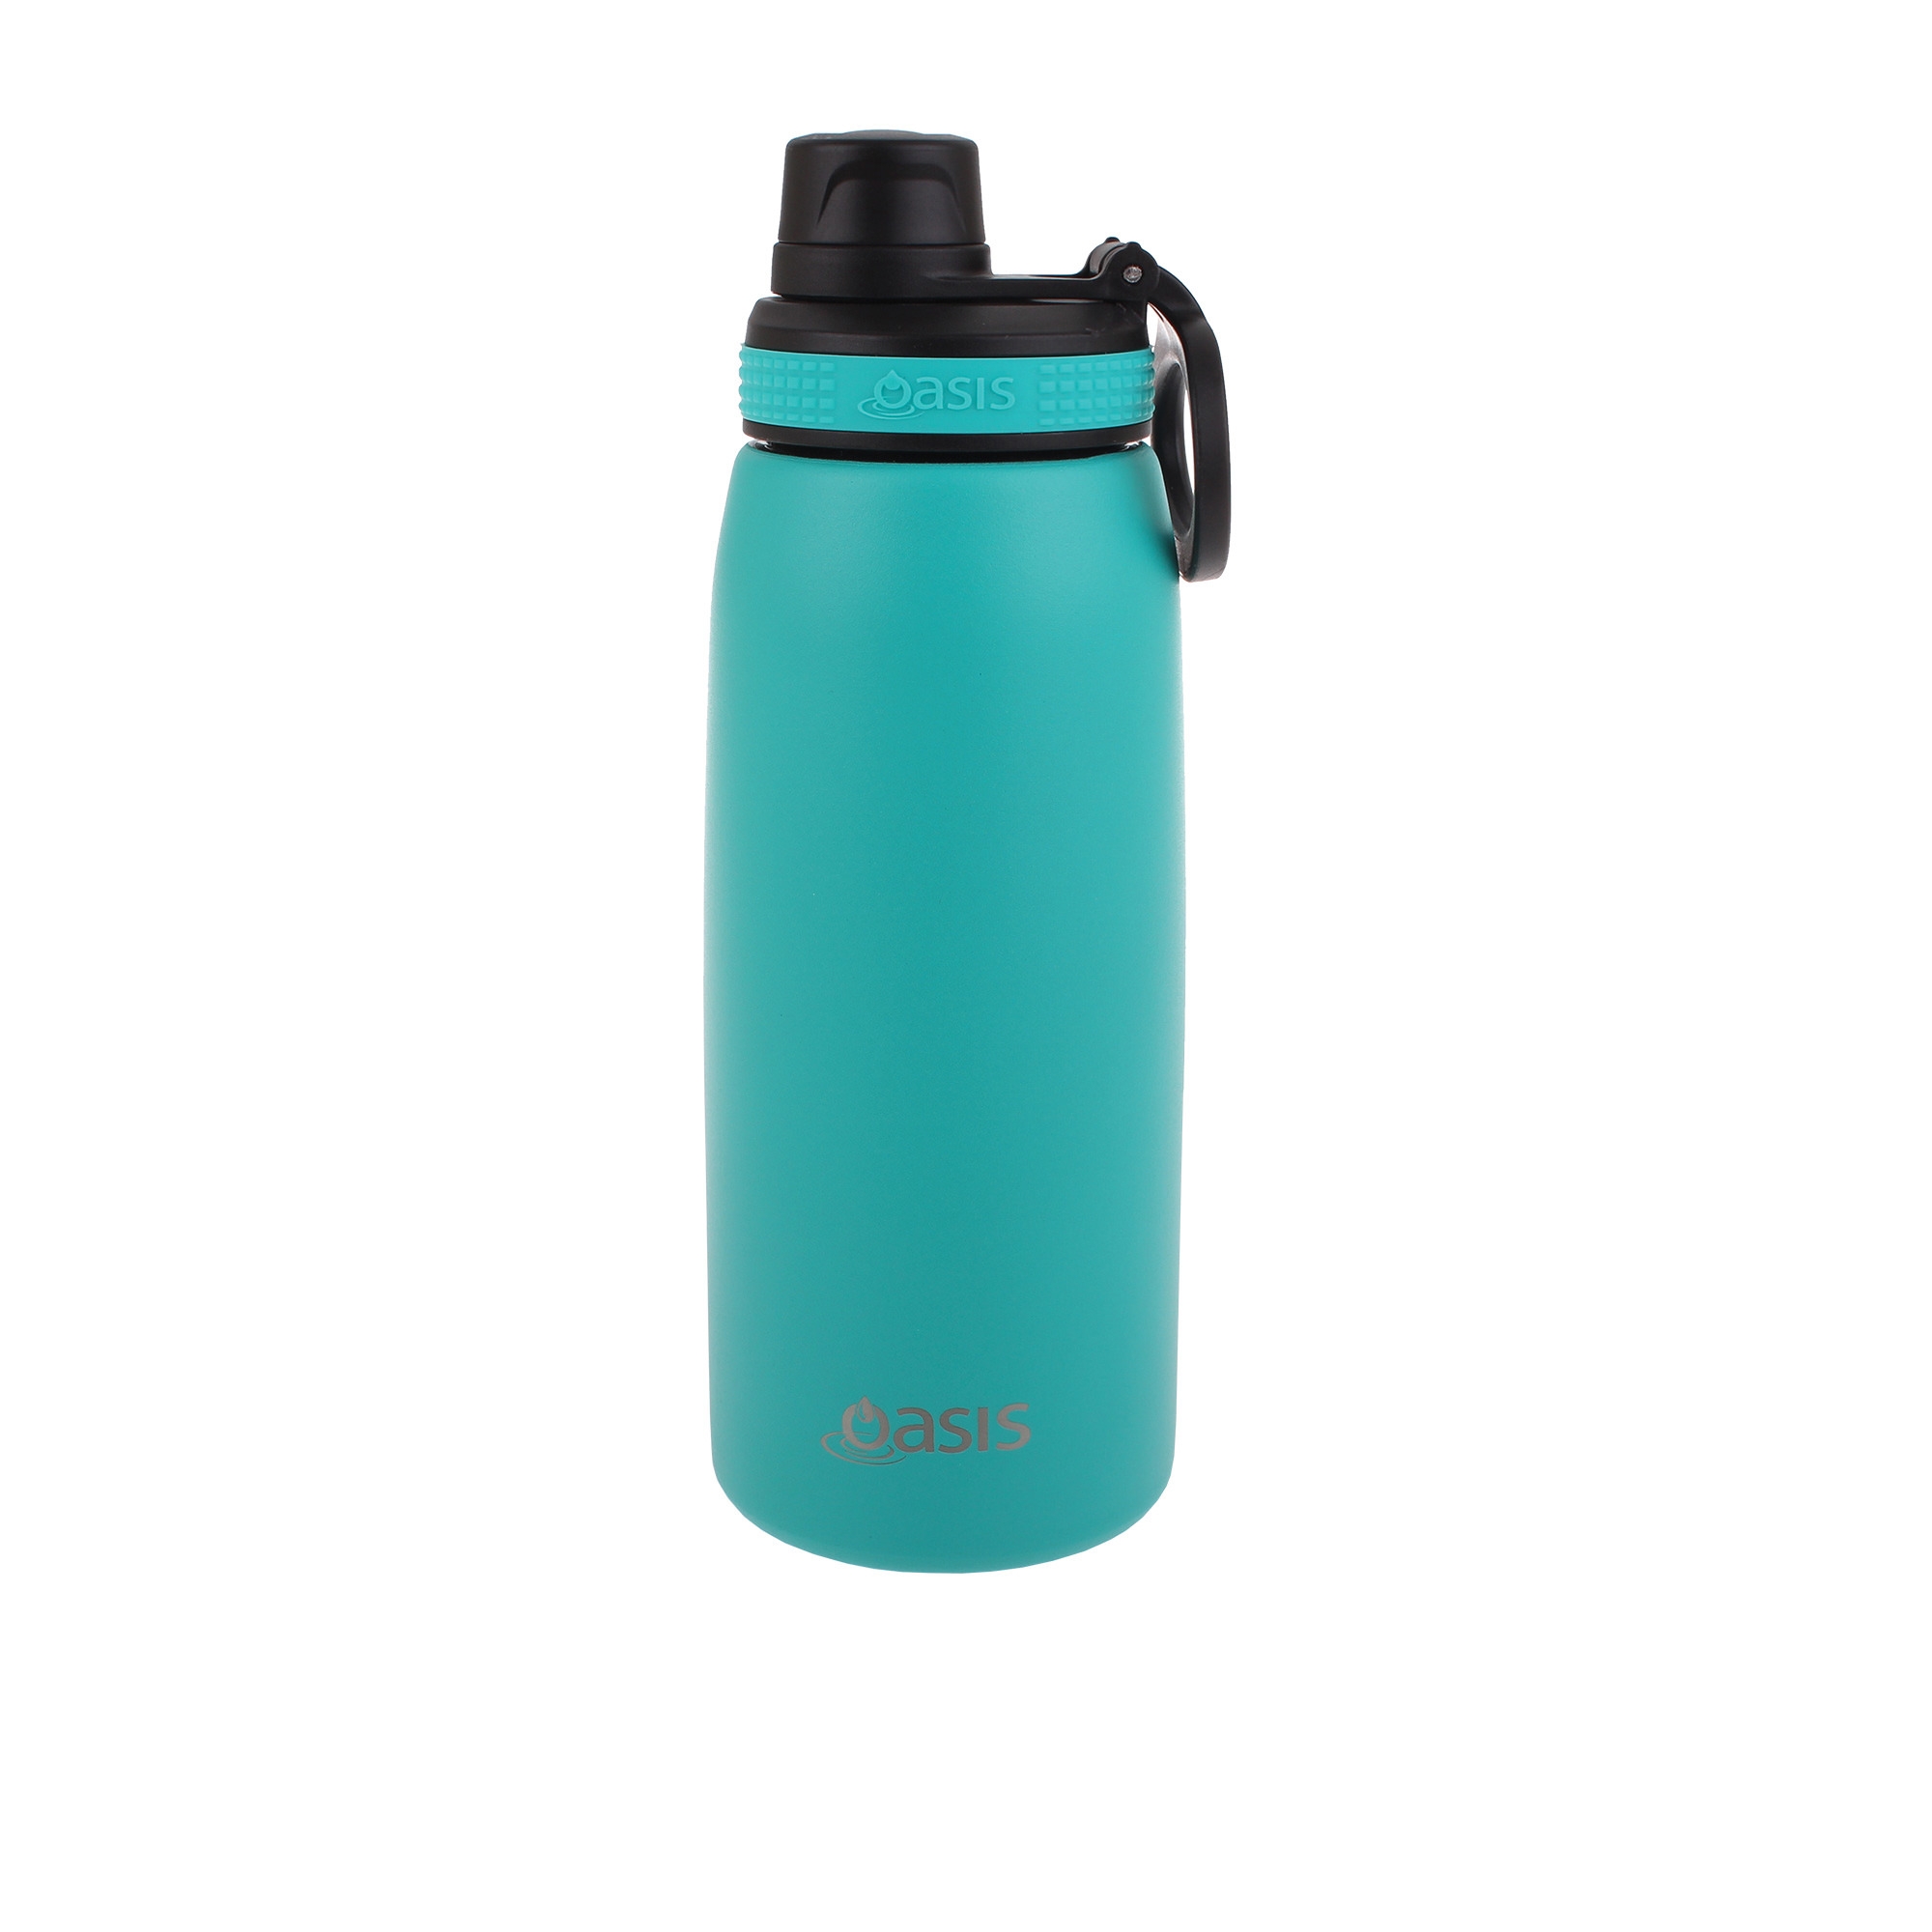 Oasis Double Wall Insulated Sports Bottle 780ml Turquoise Image 1